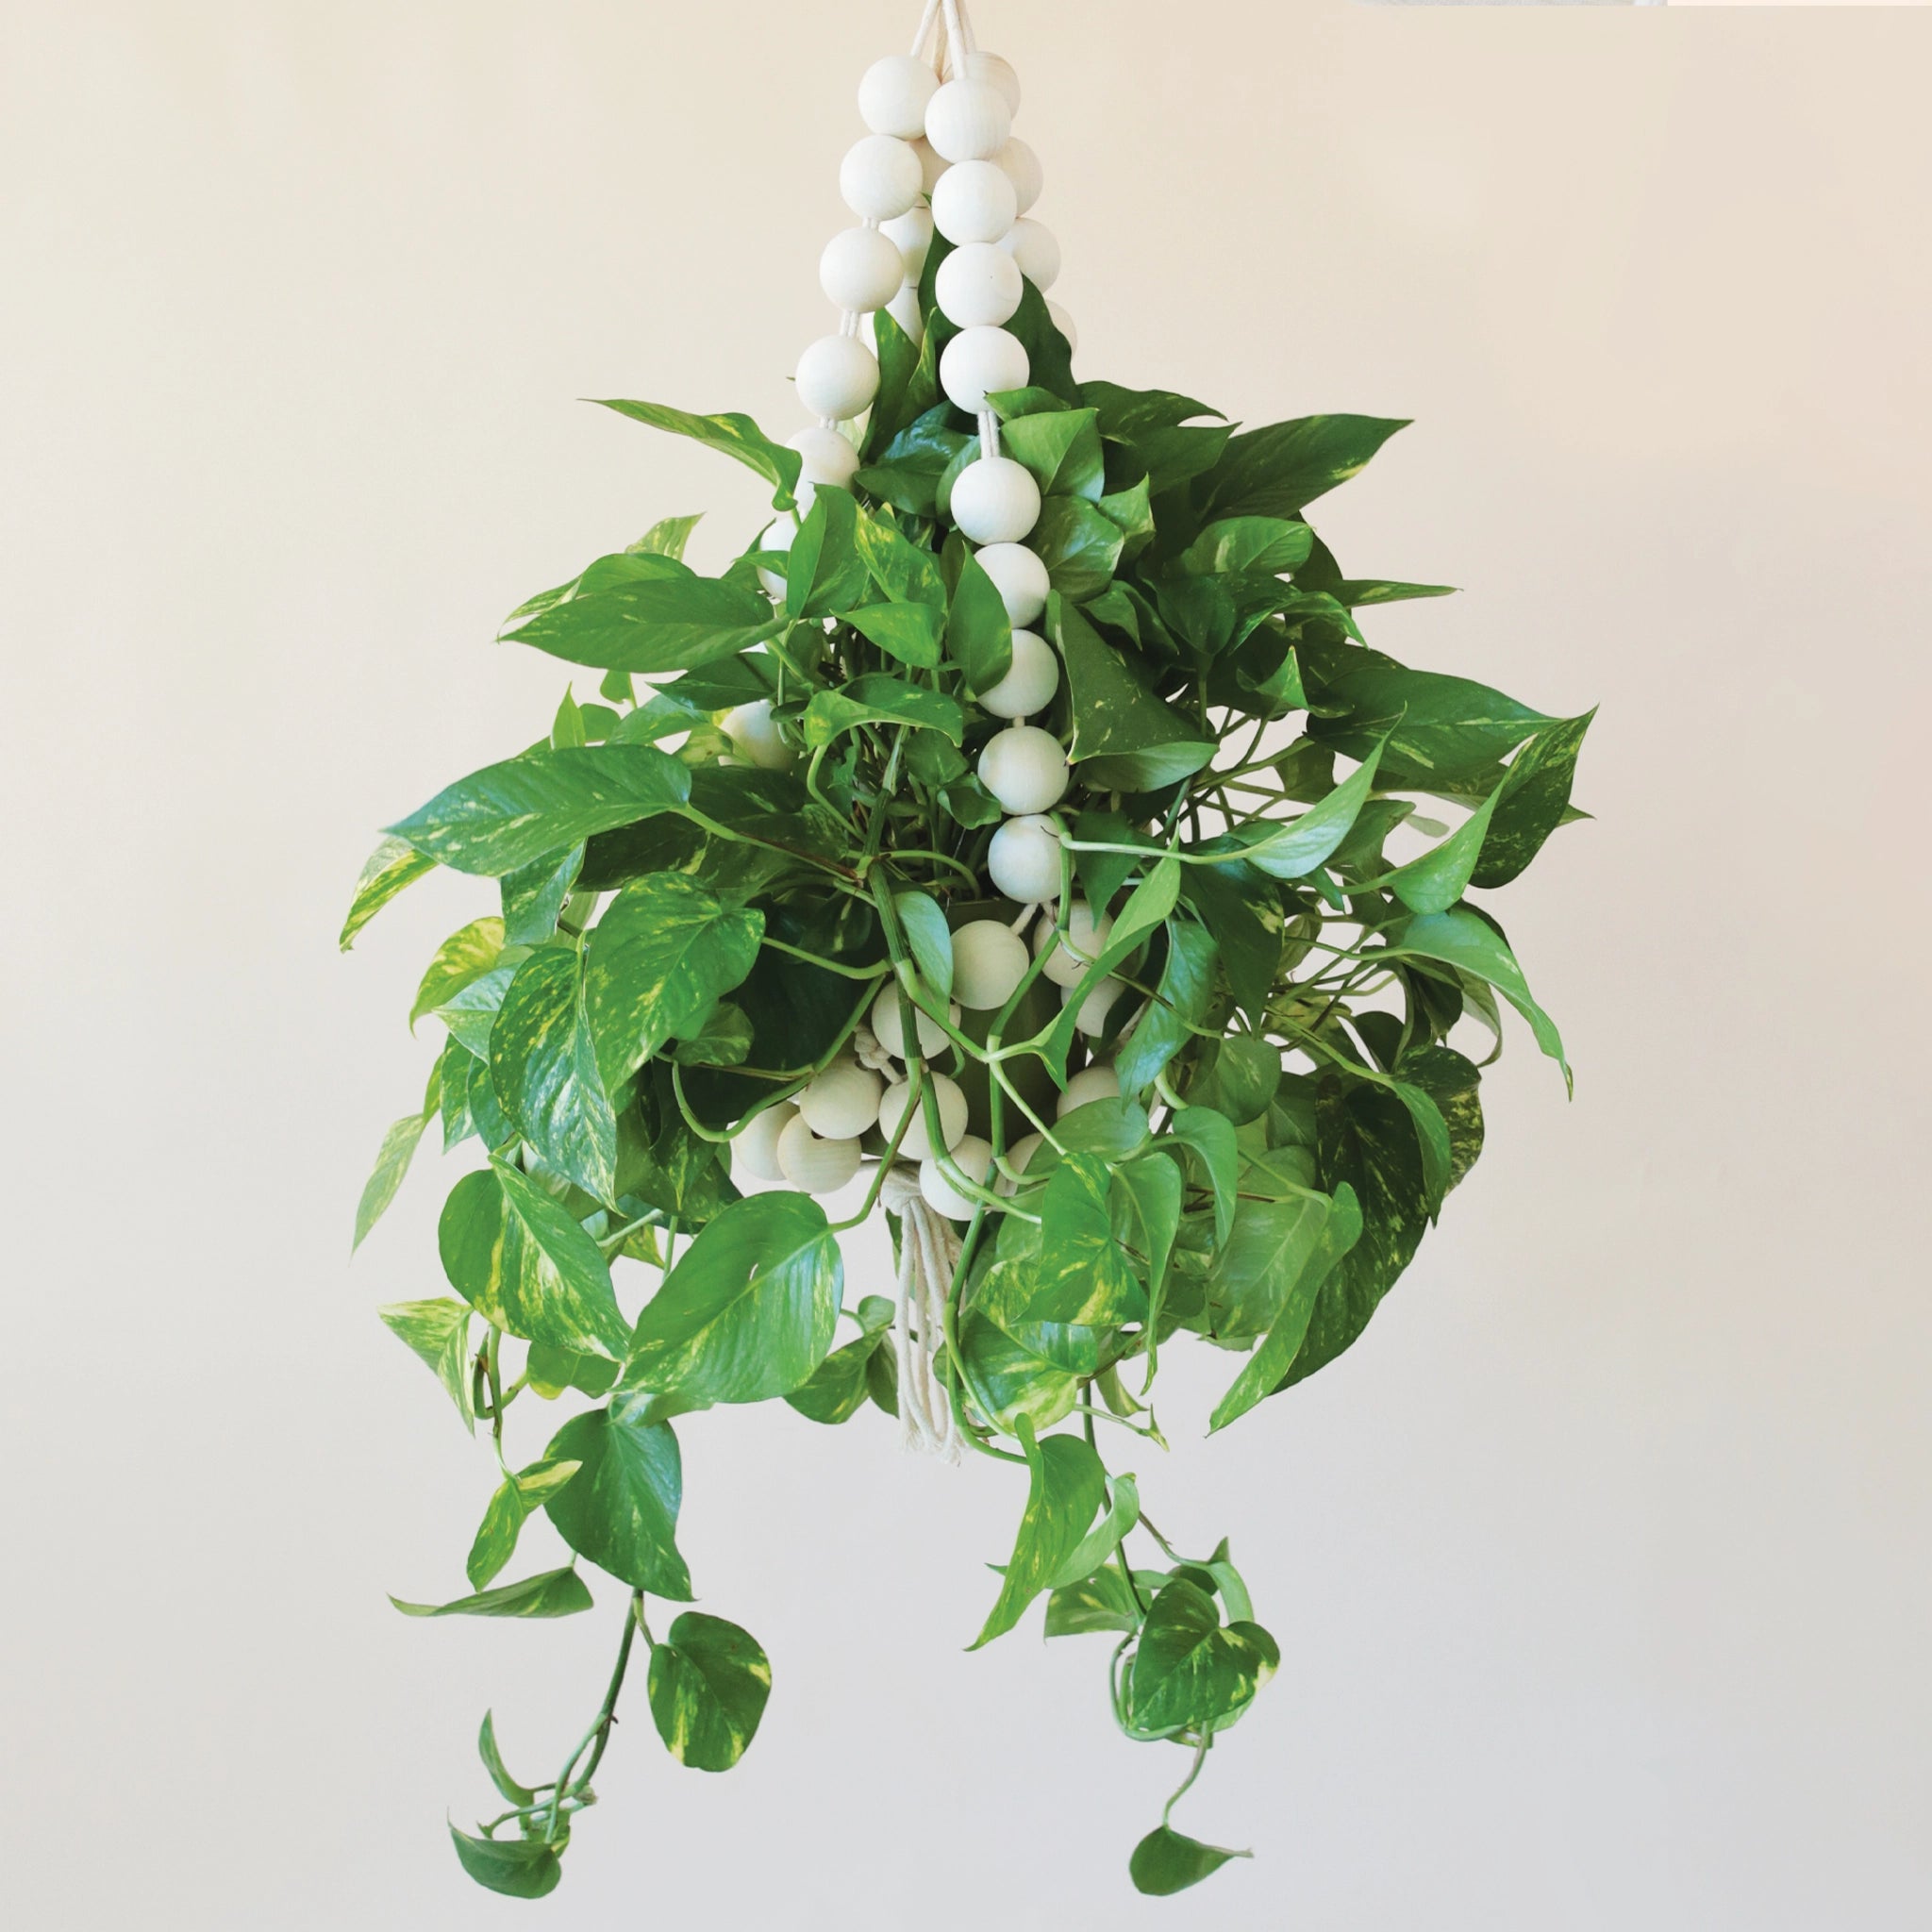 A plant hanger made of large round wooden beads forming a basket shape and coming together at the top to hang. There is a green leafy pothos inside the plant hanger that is not included with purchase.